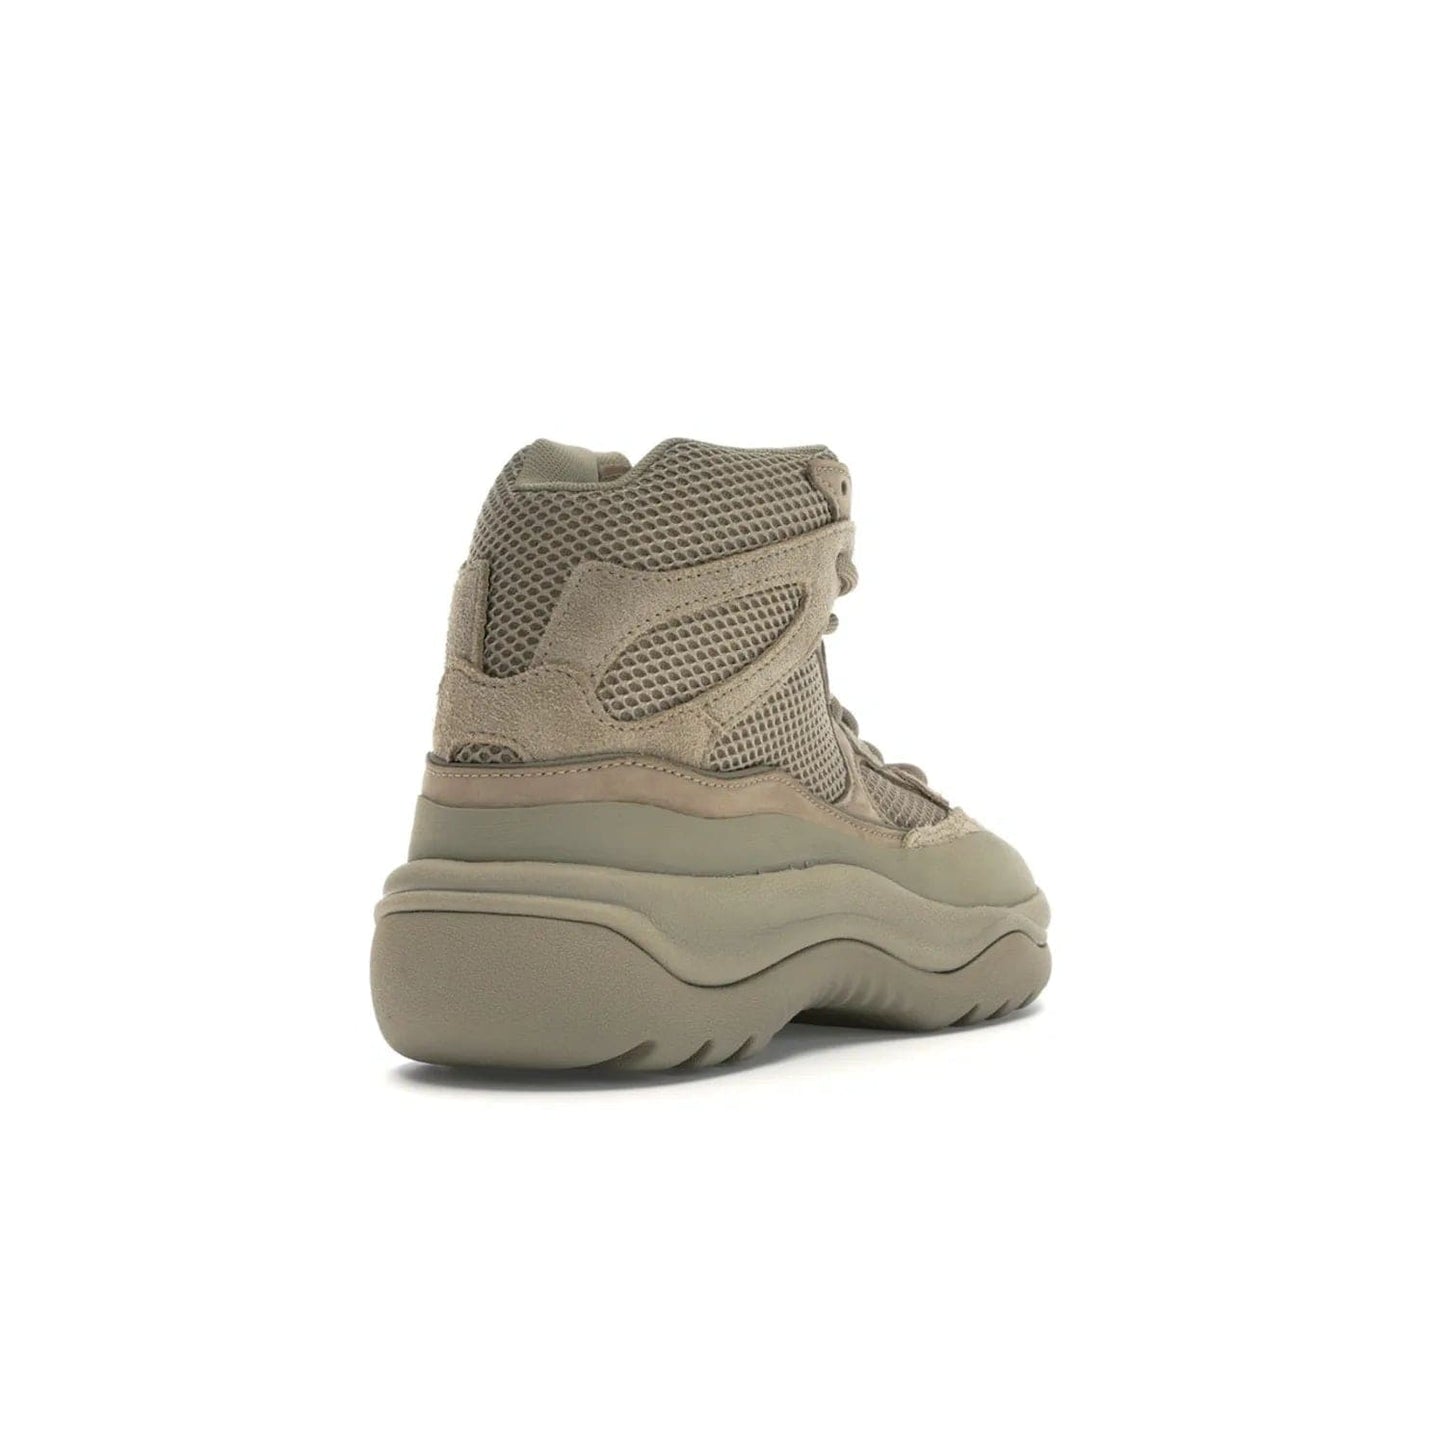 adidas Yeezy Desert Boot Rock - Image 31 - Only at www.BallersClubKickz.com - #
This season, make a fashion statement with the adidas Yeezy Desert Boot Rock. Nubuck and suede upper offers tonal style while the grooved sole provides traction and stability. Get yours in April 2019.